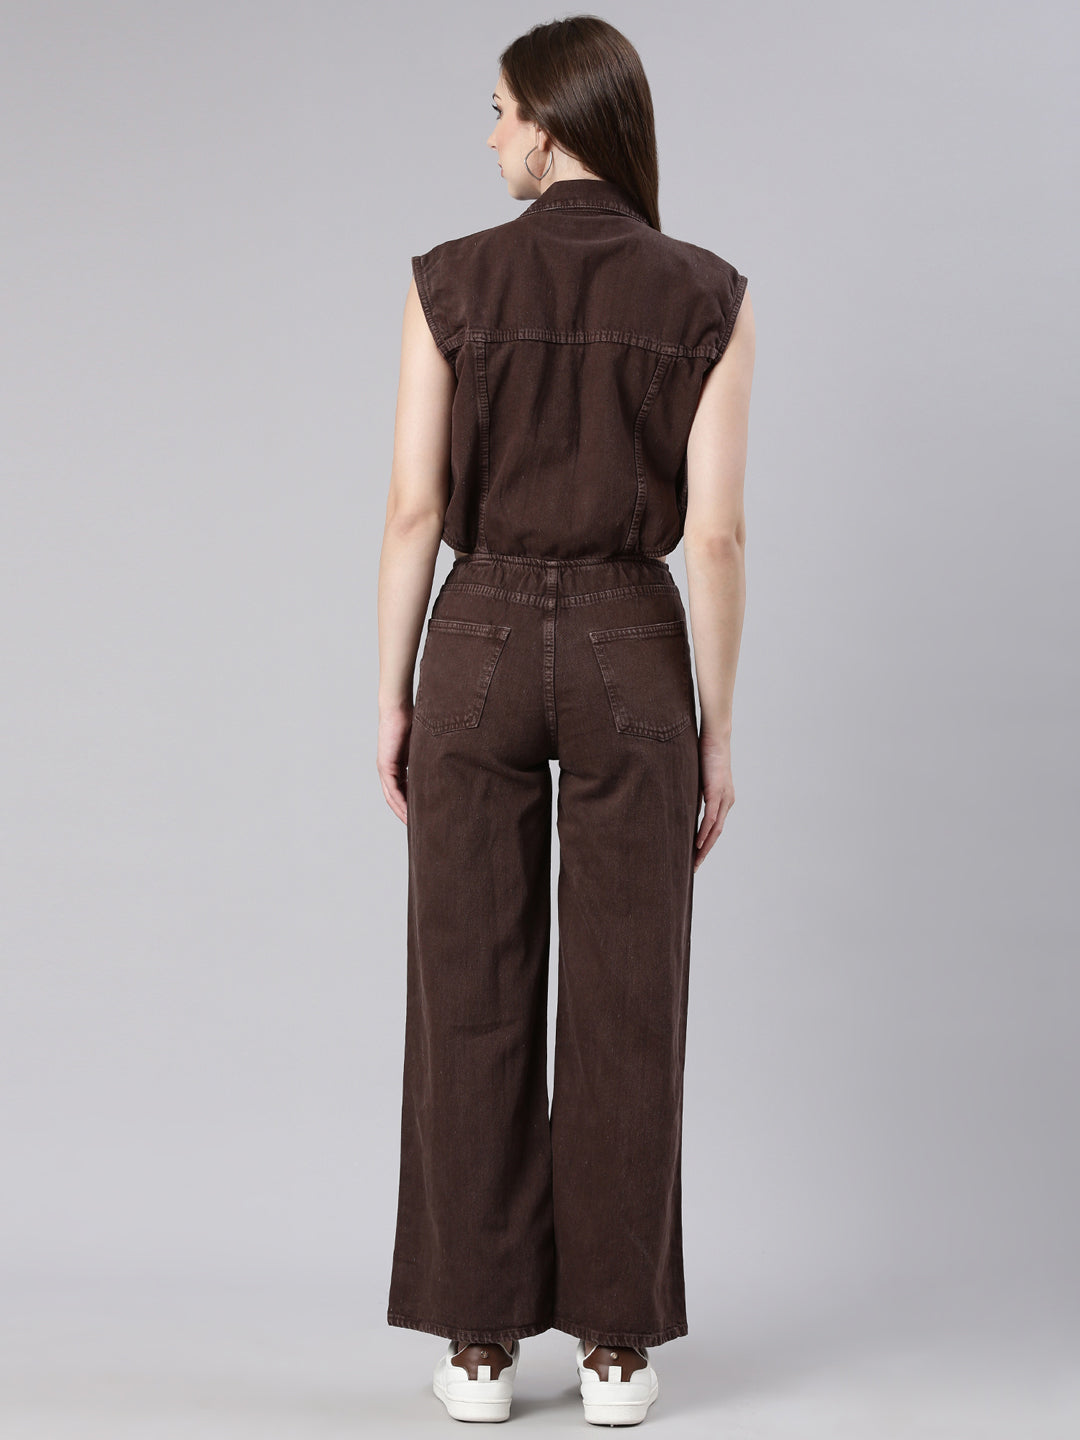 Women Solid Coffee Brown Basic Jumpsuit